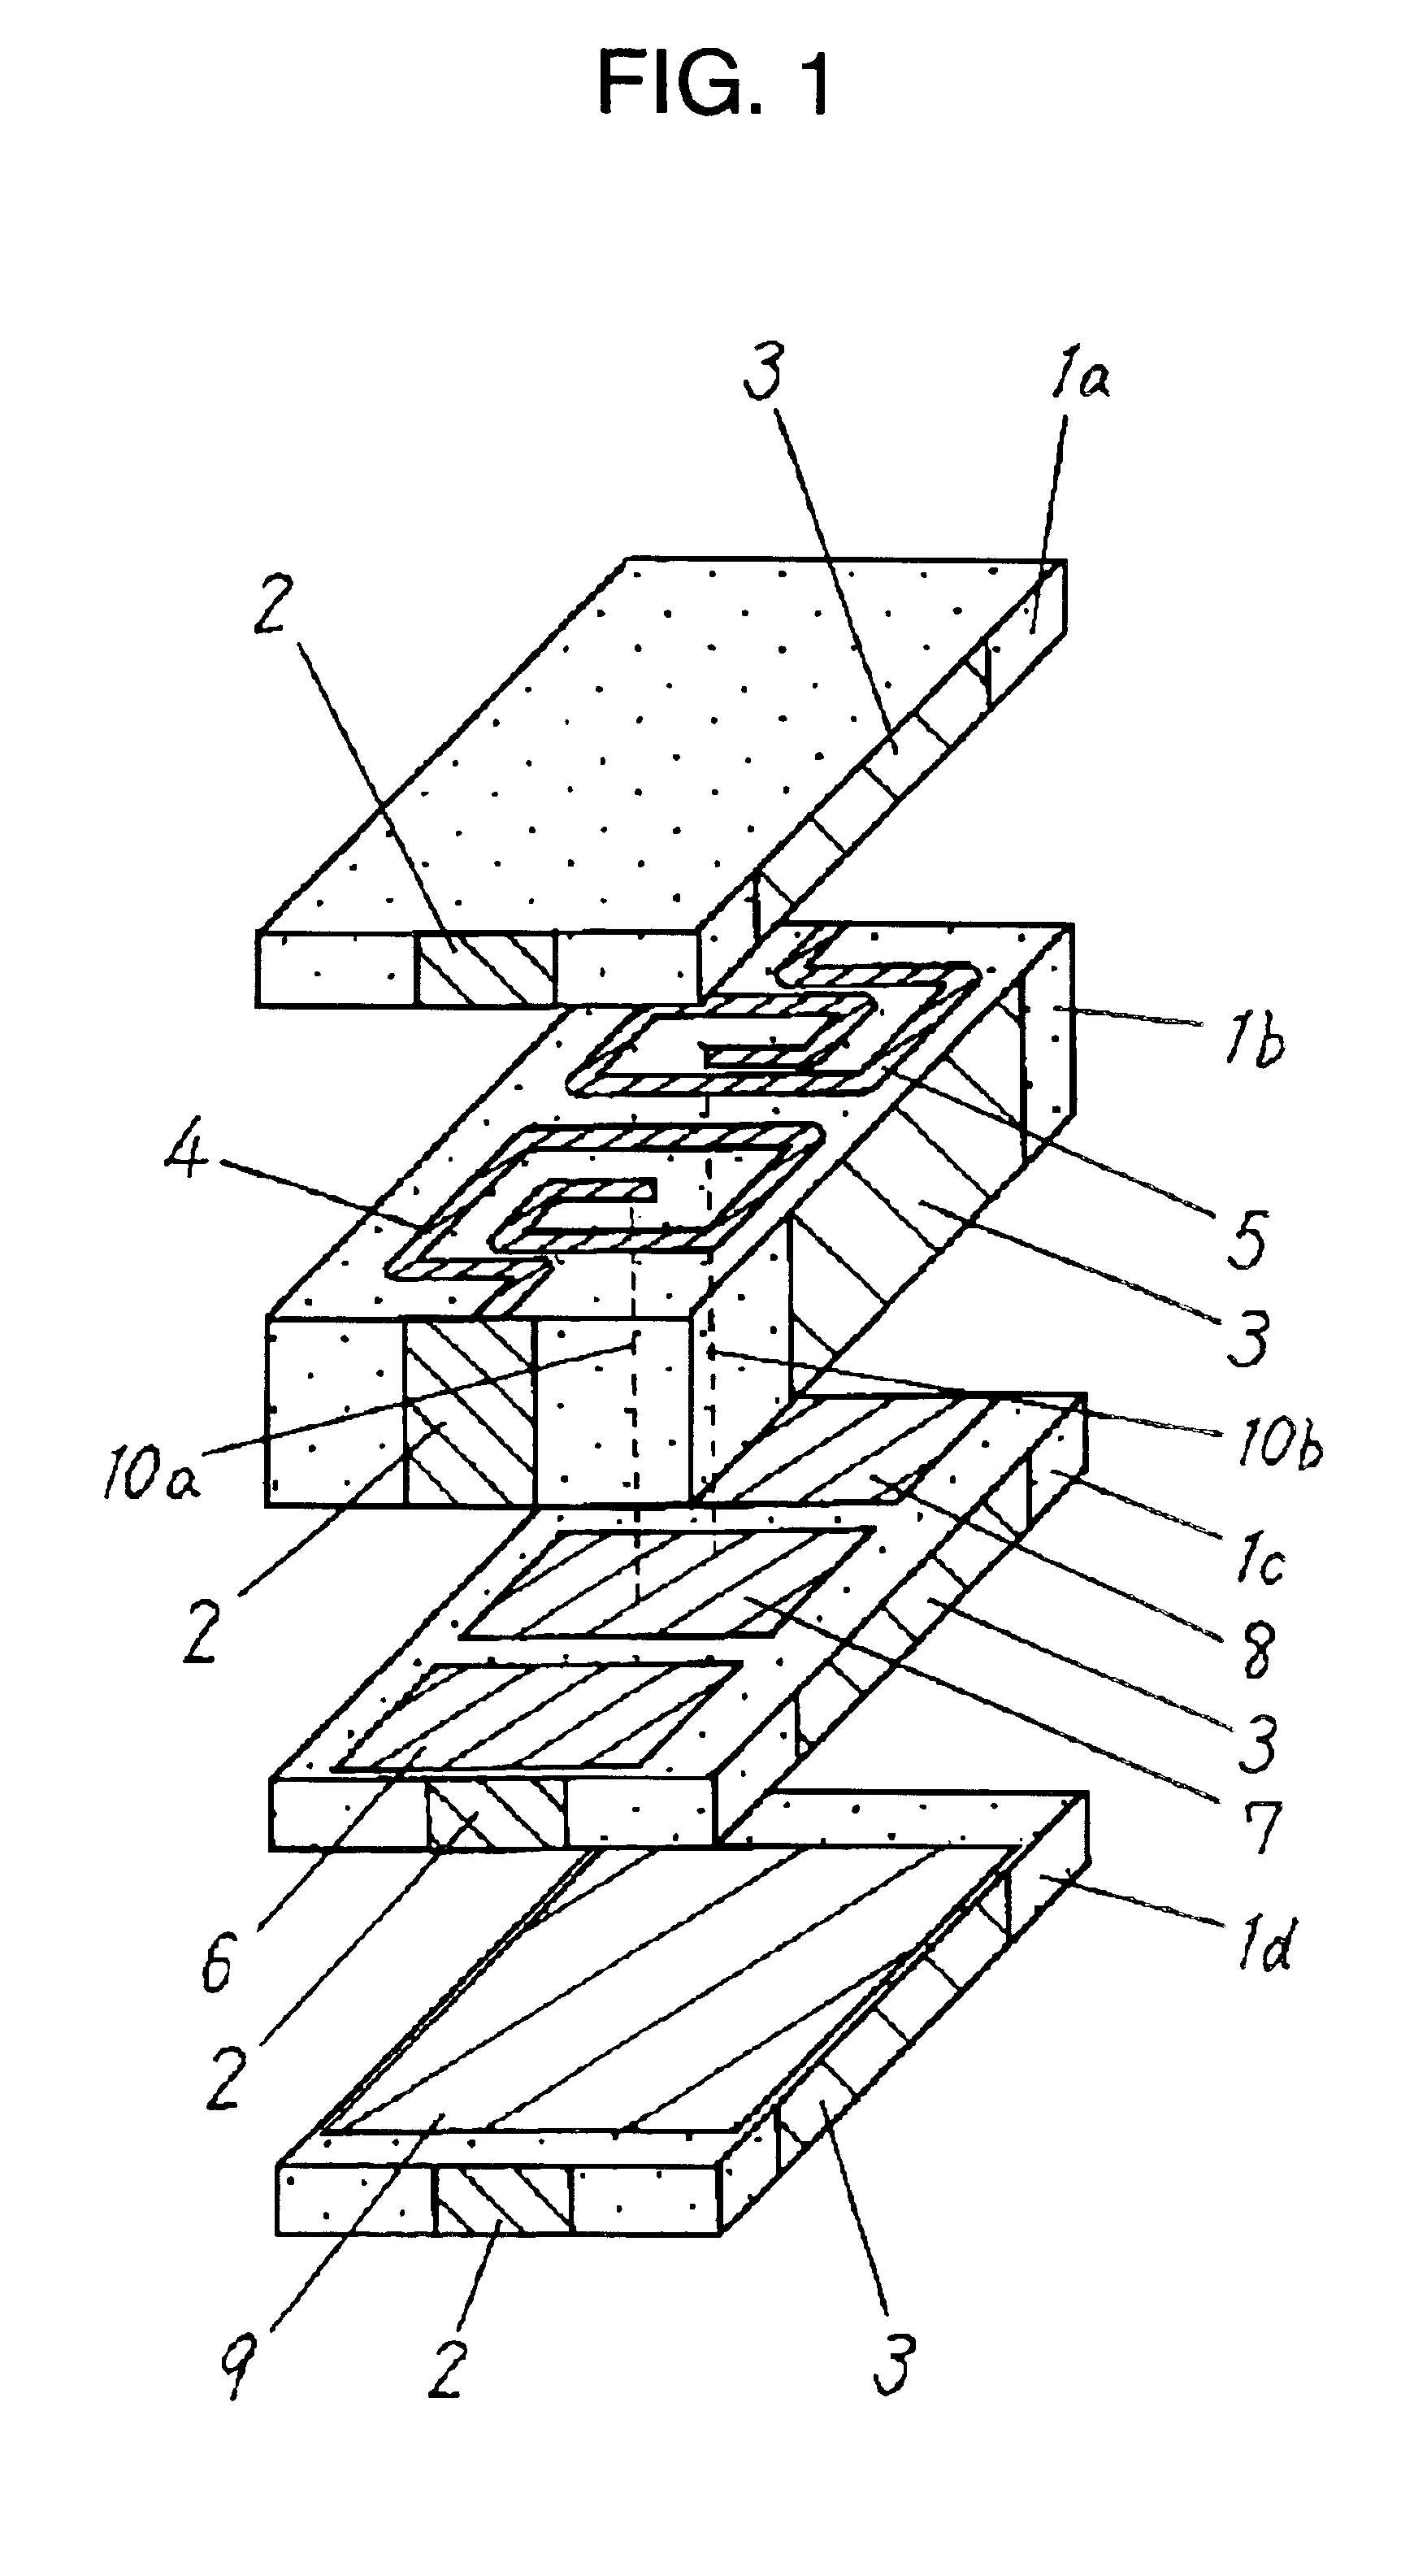 High frequency laminated device